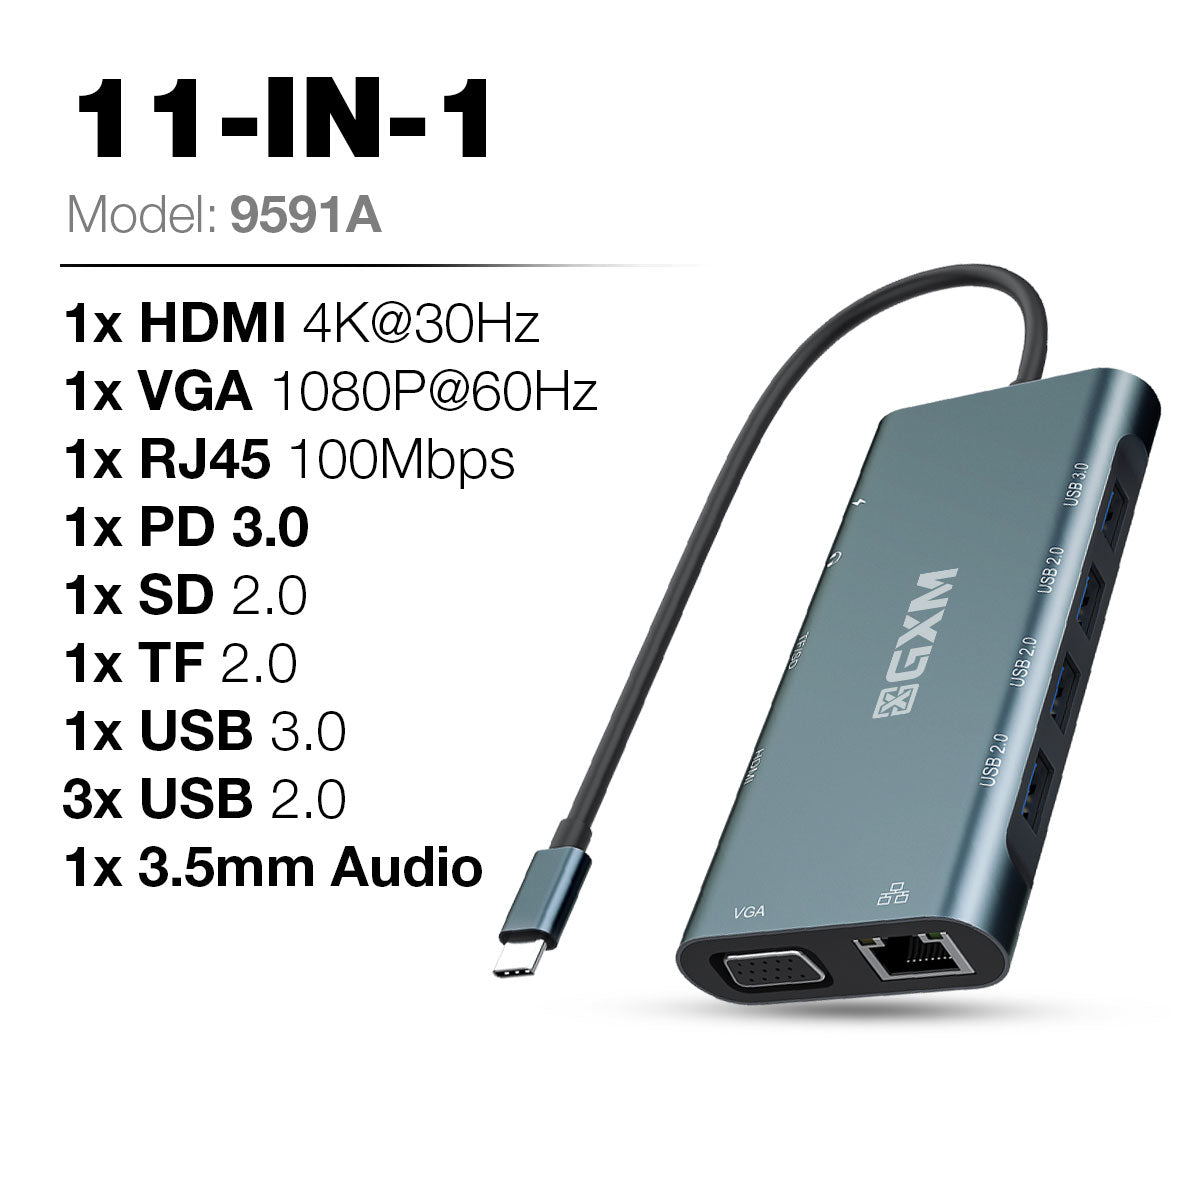 GXM 11 IN 1 USB-C Multi-function dock station HDMI RJ45 LAN PD Charging TF SD Card Slot 4x USB Laptop Mobile Phone 9591A